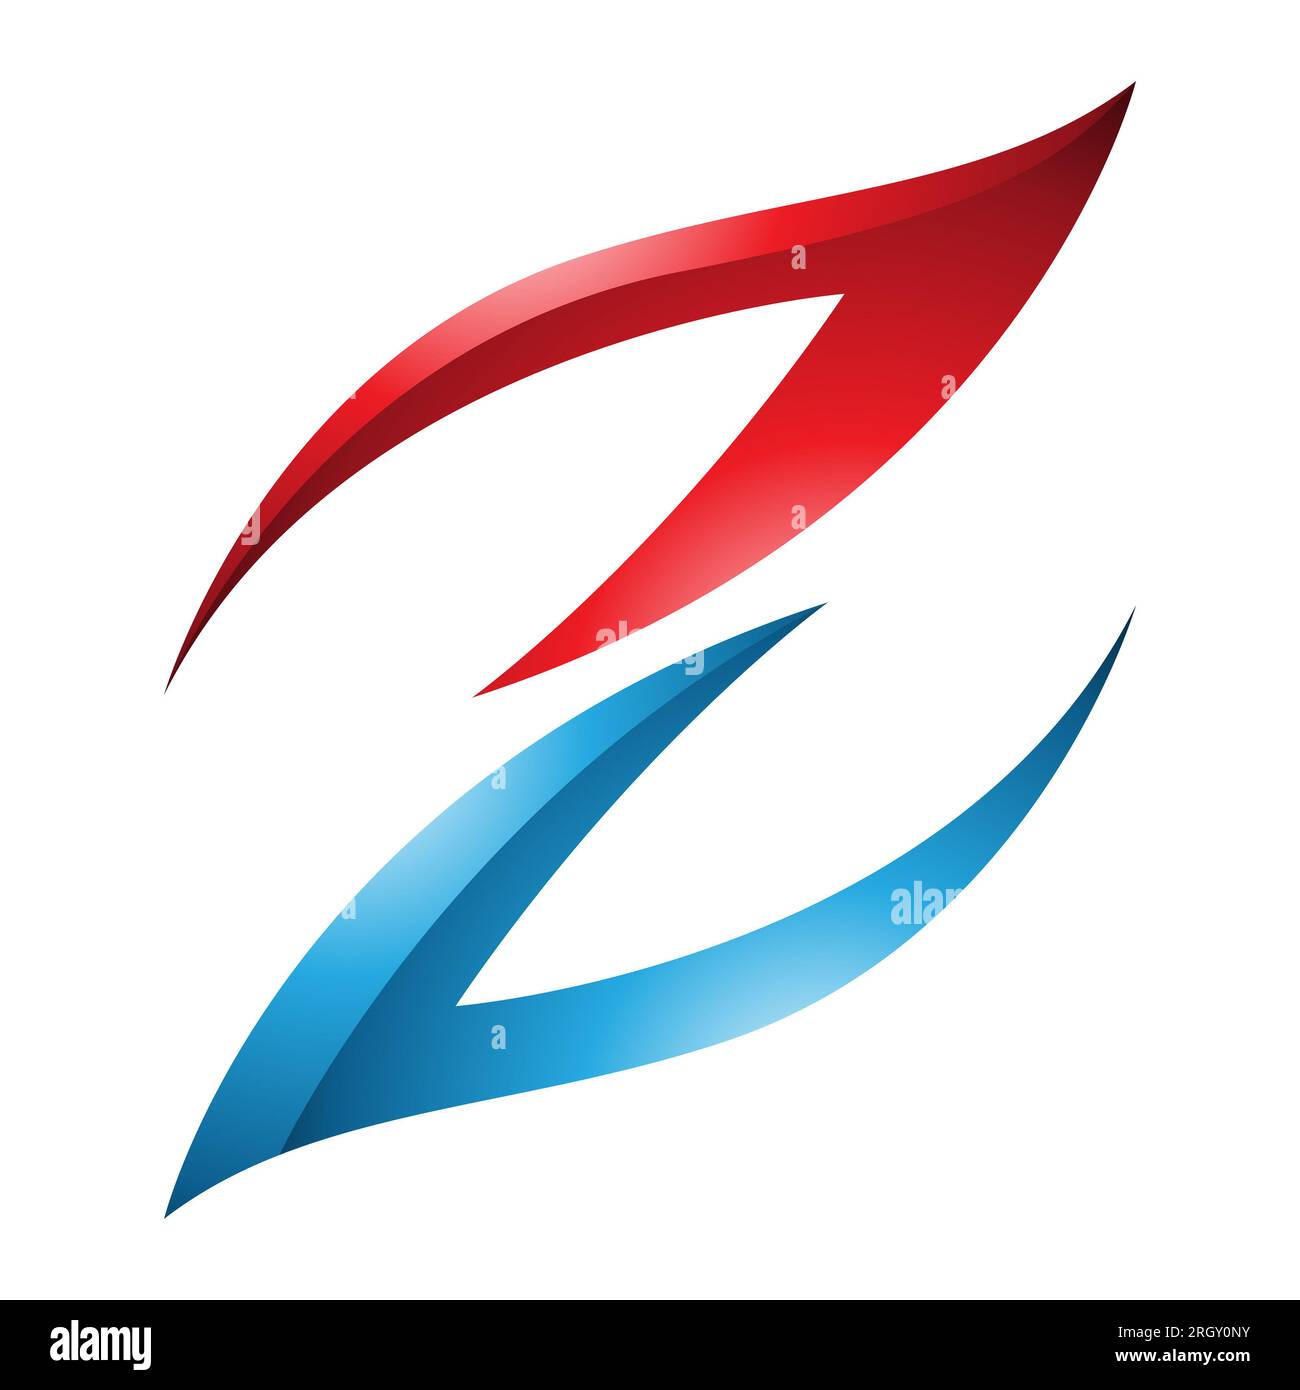 Red and Blue Glossy Fire Shaped Letter Z Icon on a White Background Stock Photo